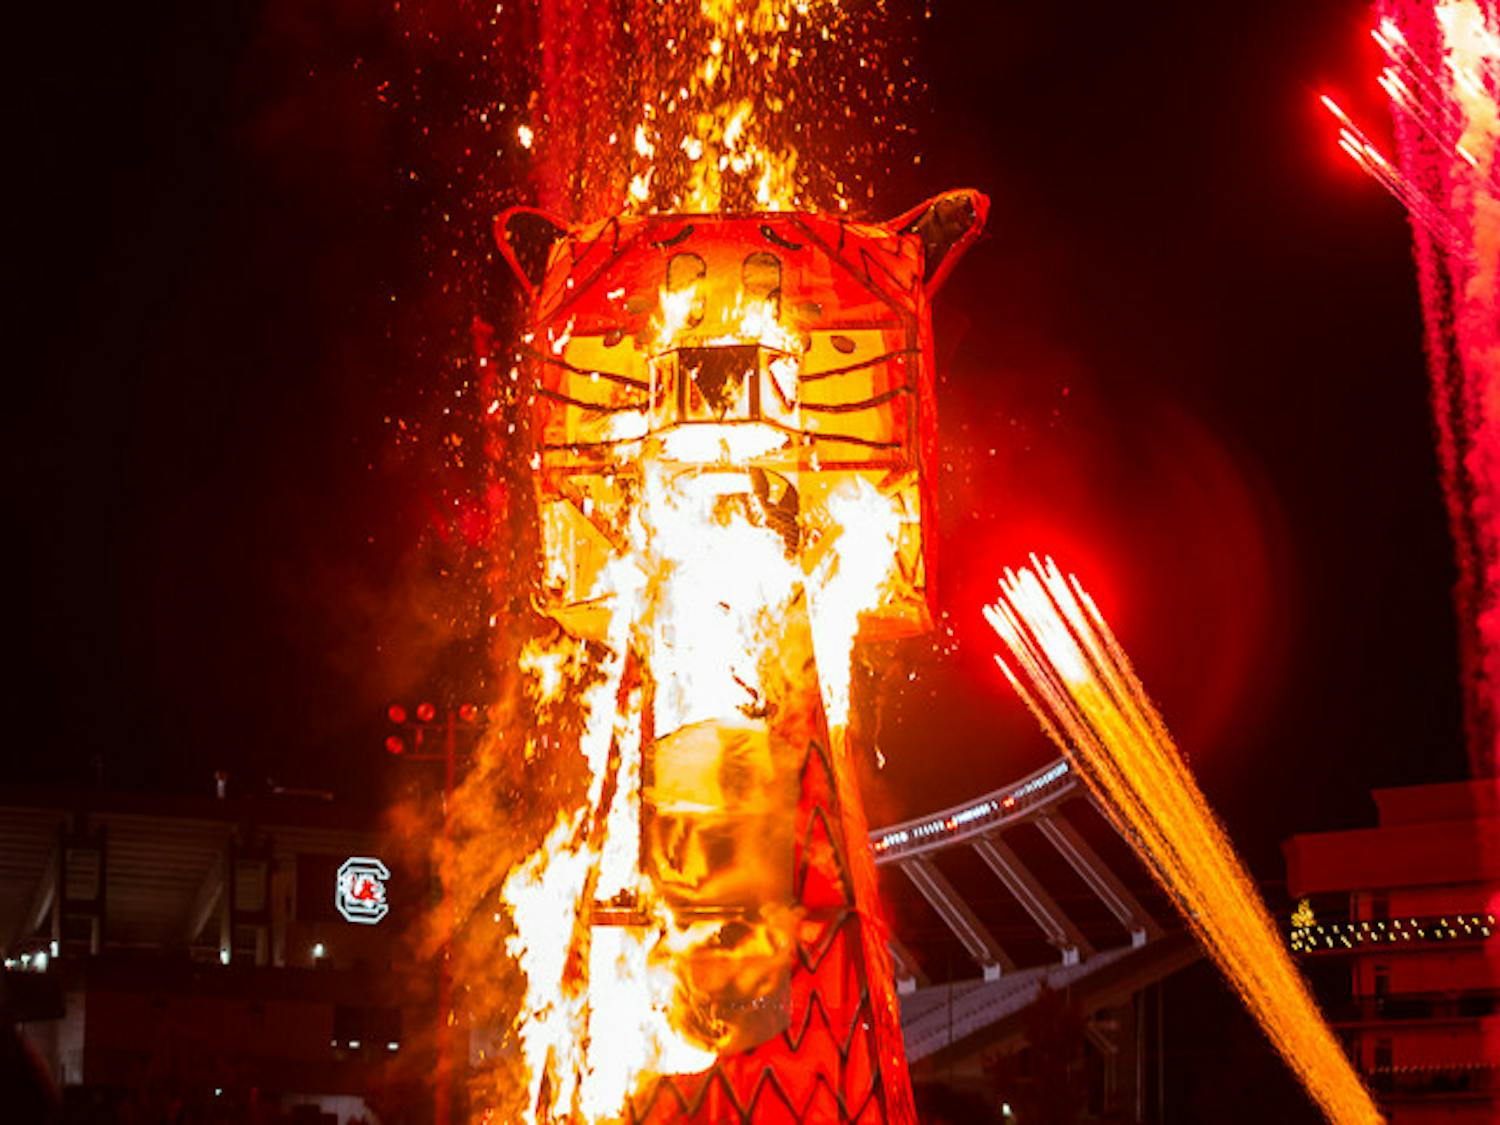 The blaze begins as the flames quickly catch and spread throughout the 32.5-foot-tall Celmson Tiger Statue. Fireworks are set off in the background for added effect.